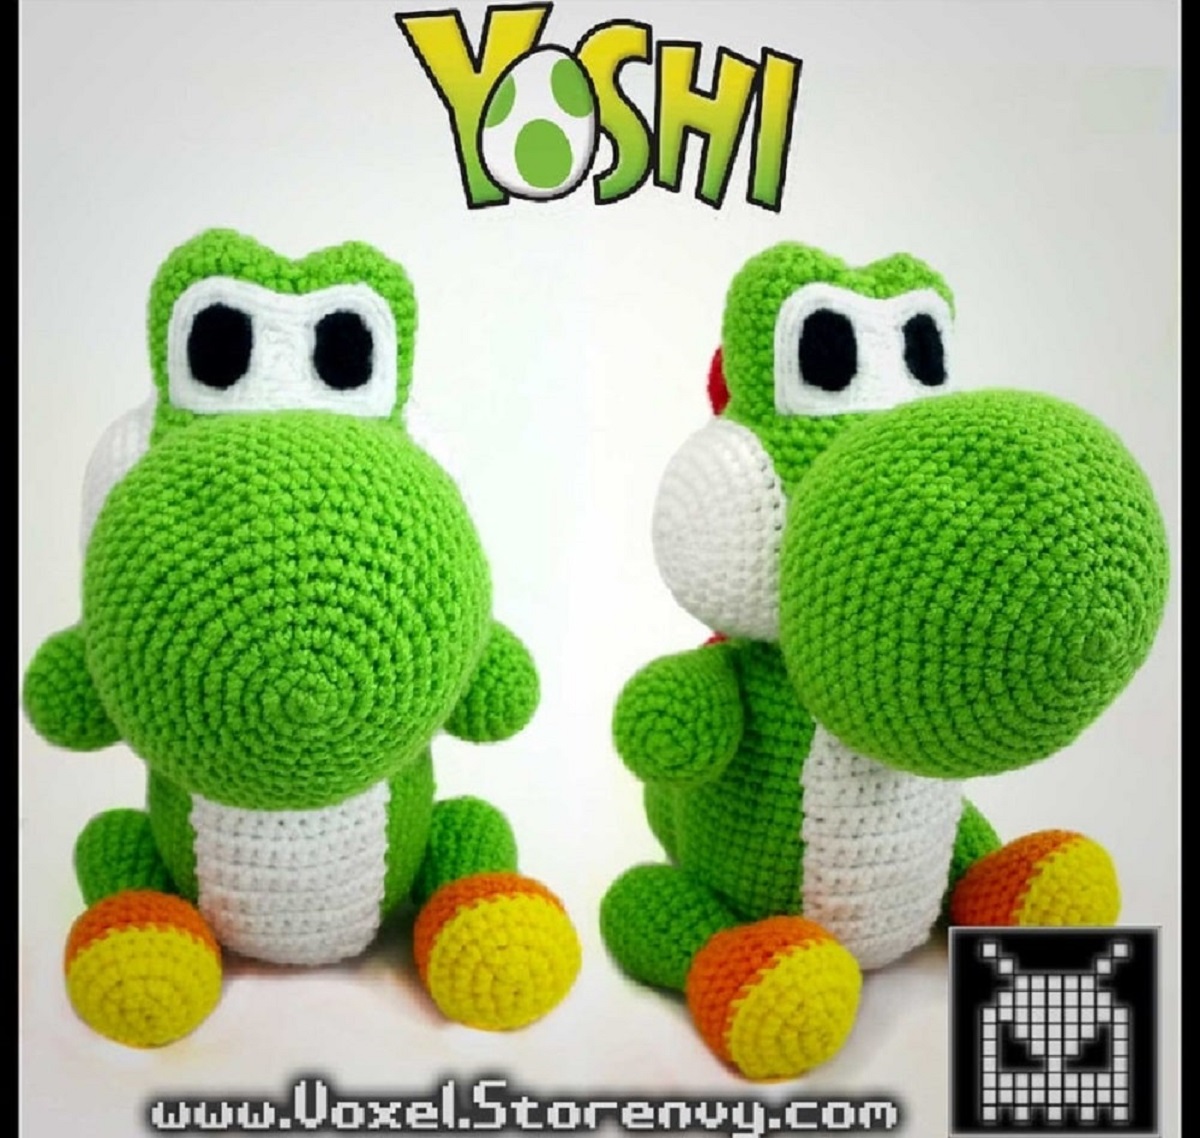 Two crochet green and white Yoshi’s sitting next to each other with large noses and small yellow and orange feet.